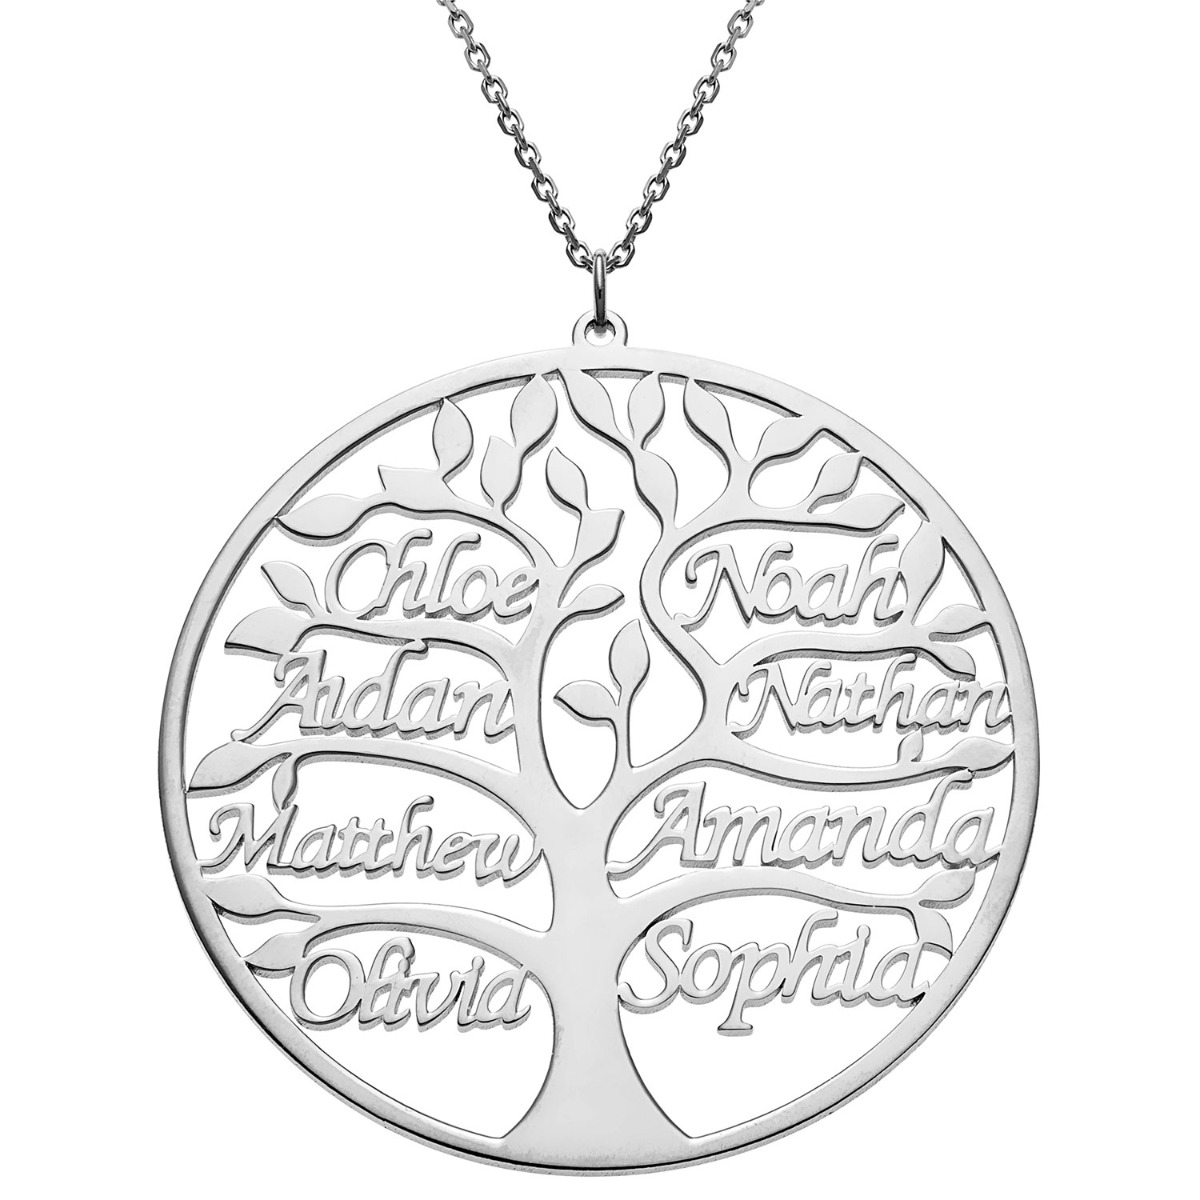 Silver plated family tree necklace